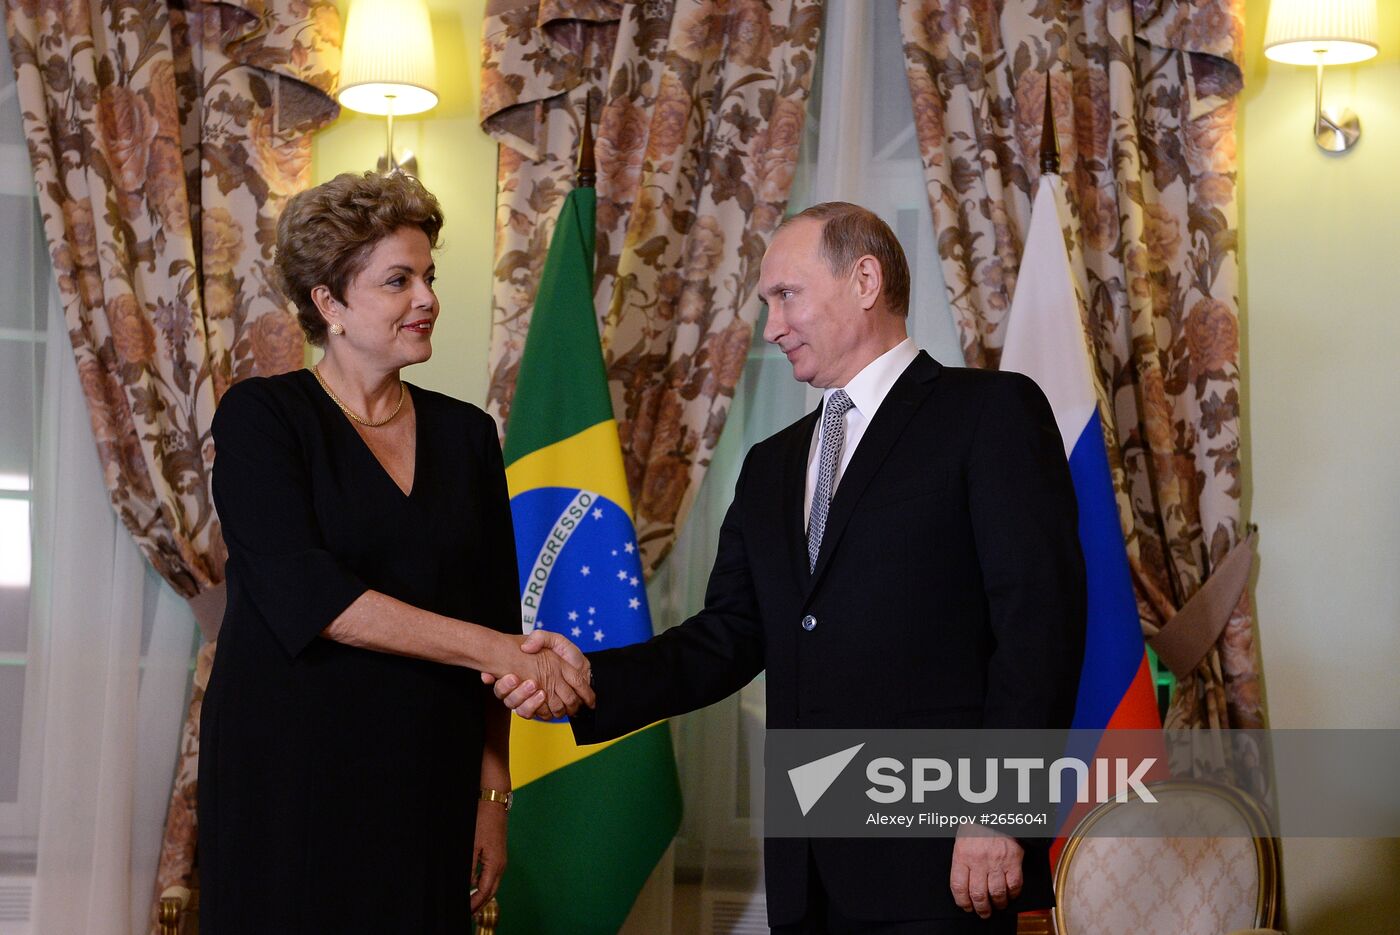 President of the Russian Federation Vladimir Putin meets with President of the Federative Republic of Brazil Dilma Rousseff